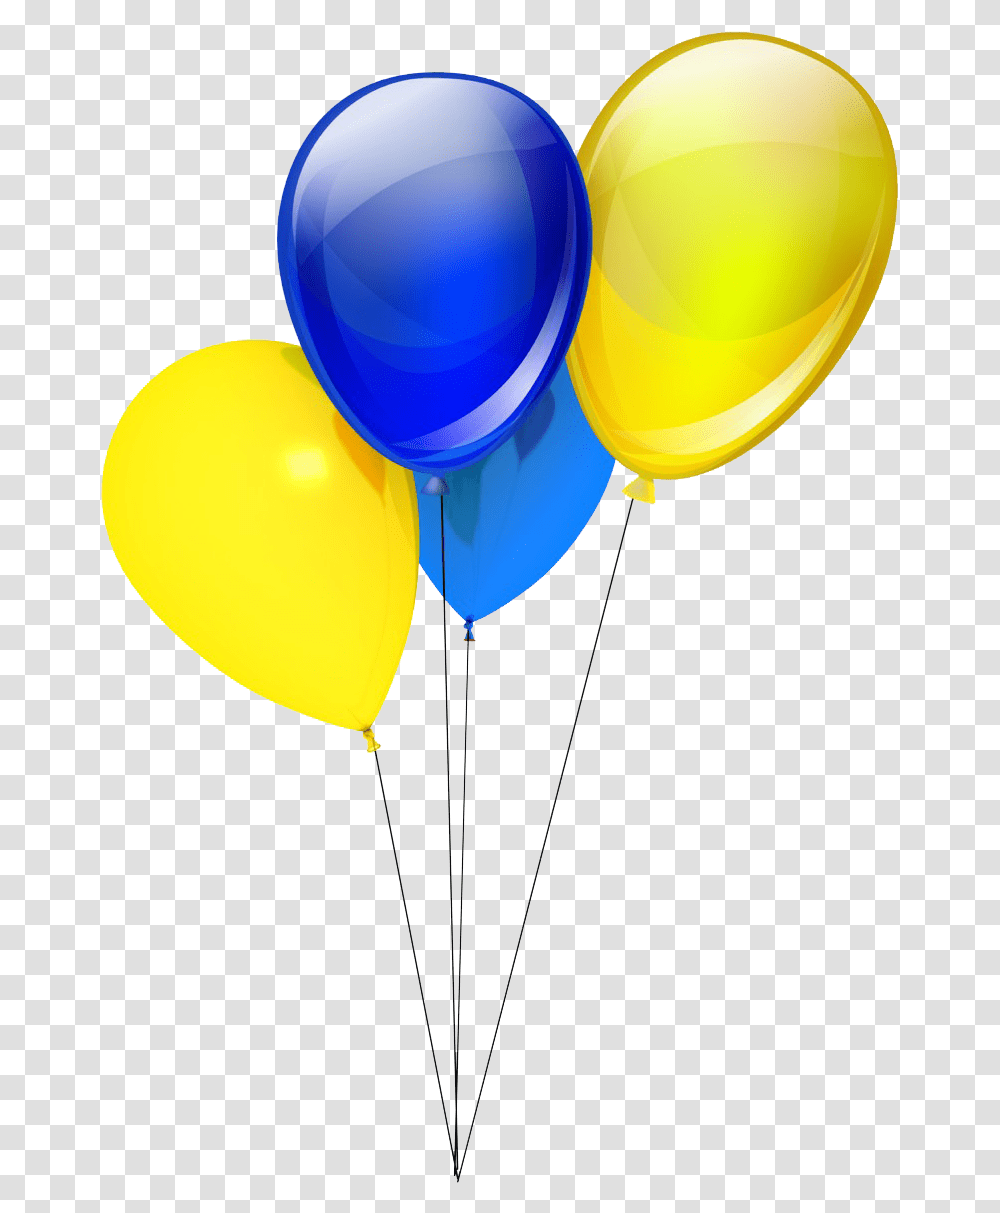 Balloons Images Free Download Real Blue And Gold Balloons Clipart Transparent Png